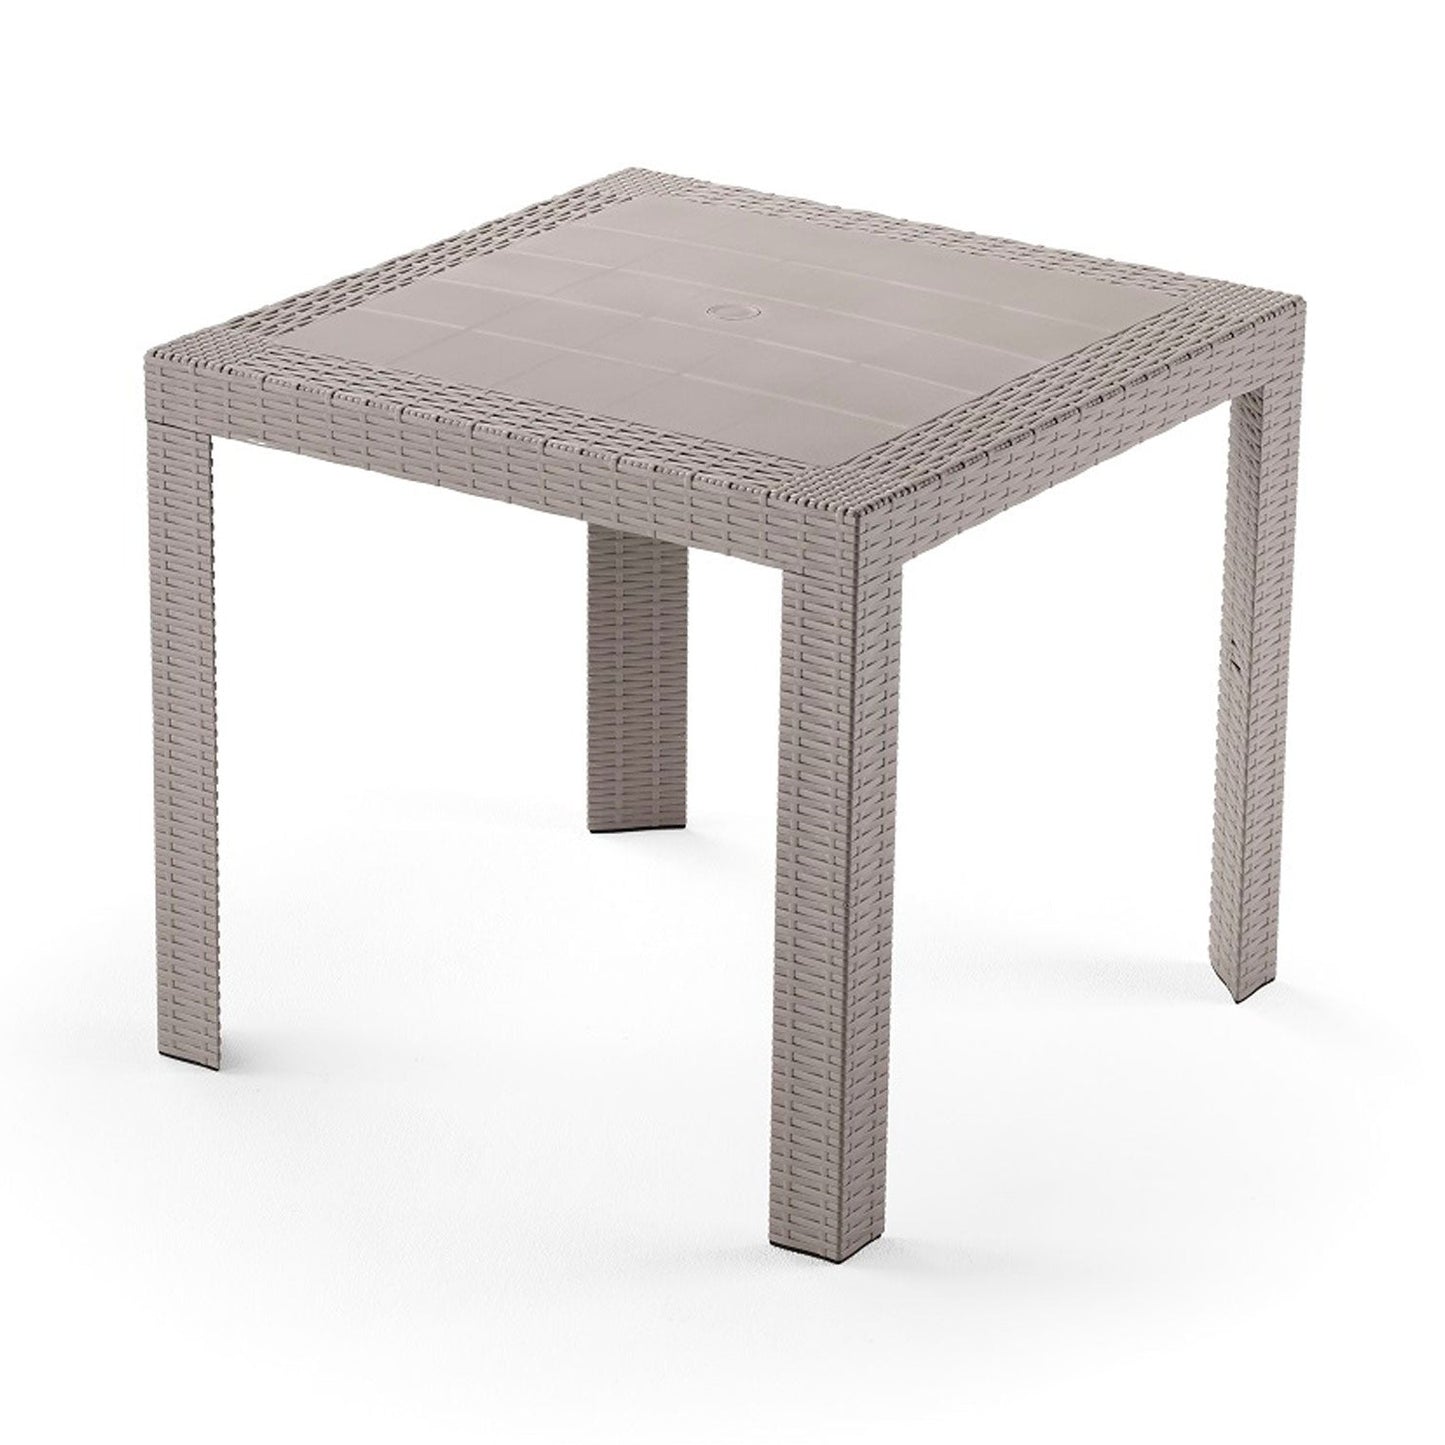 Saturno Rattan Style Technopolymer 80cm Square Dining Table by Areta